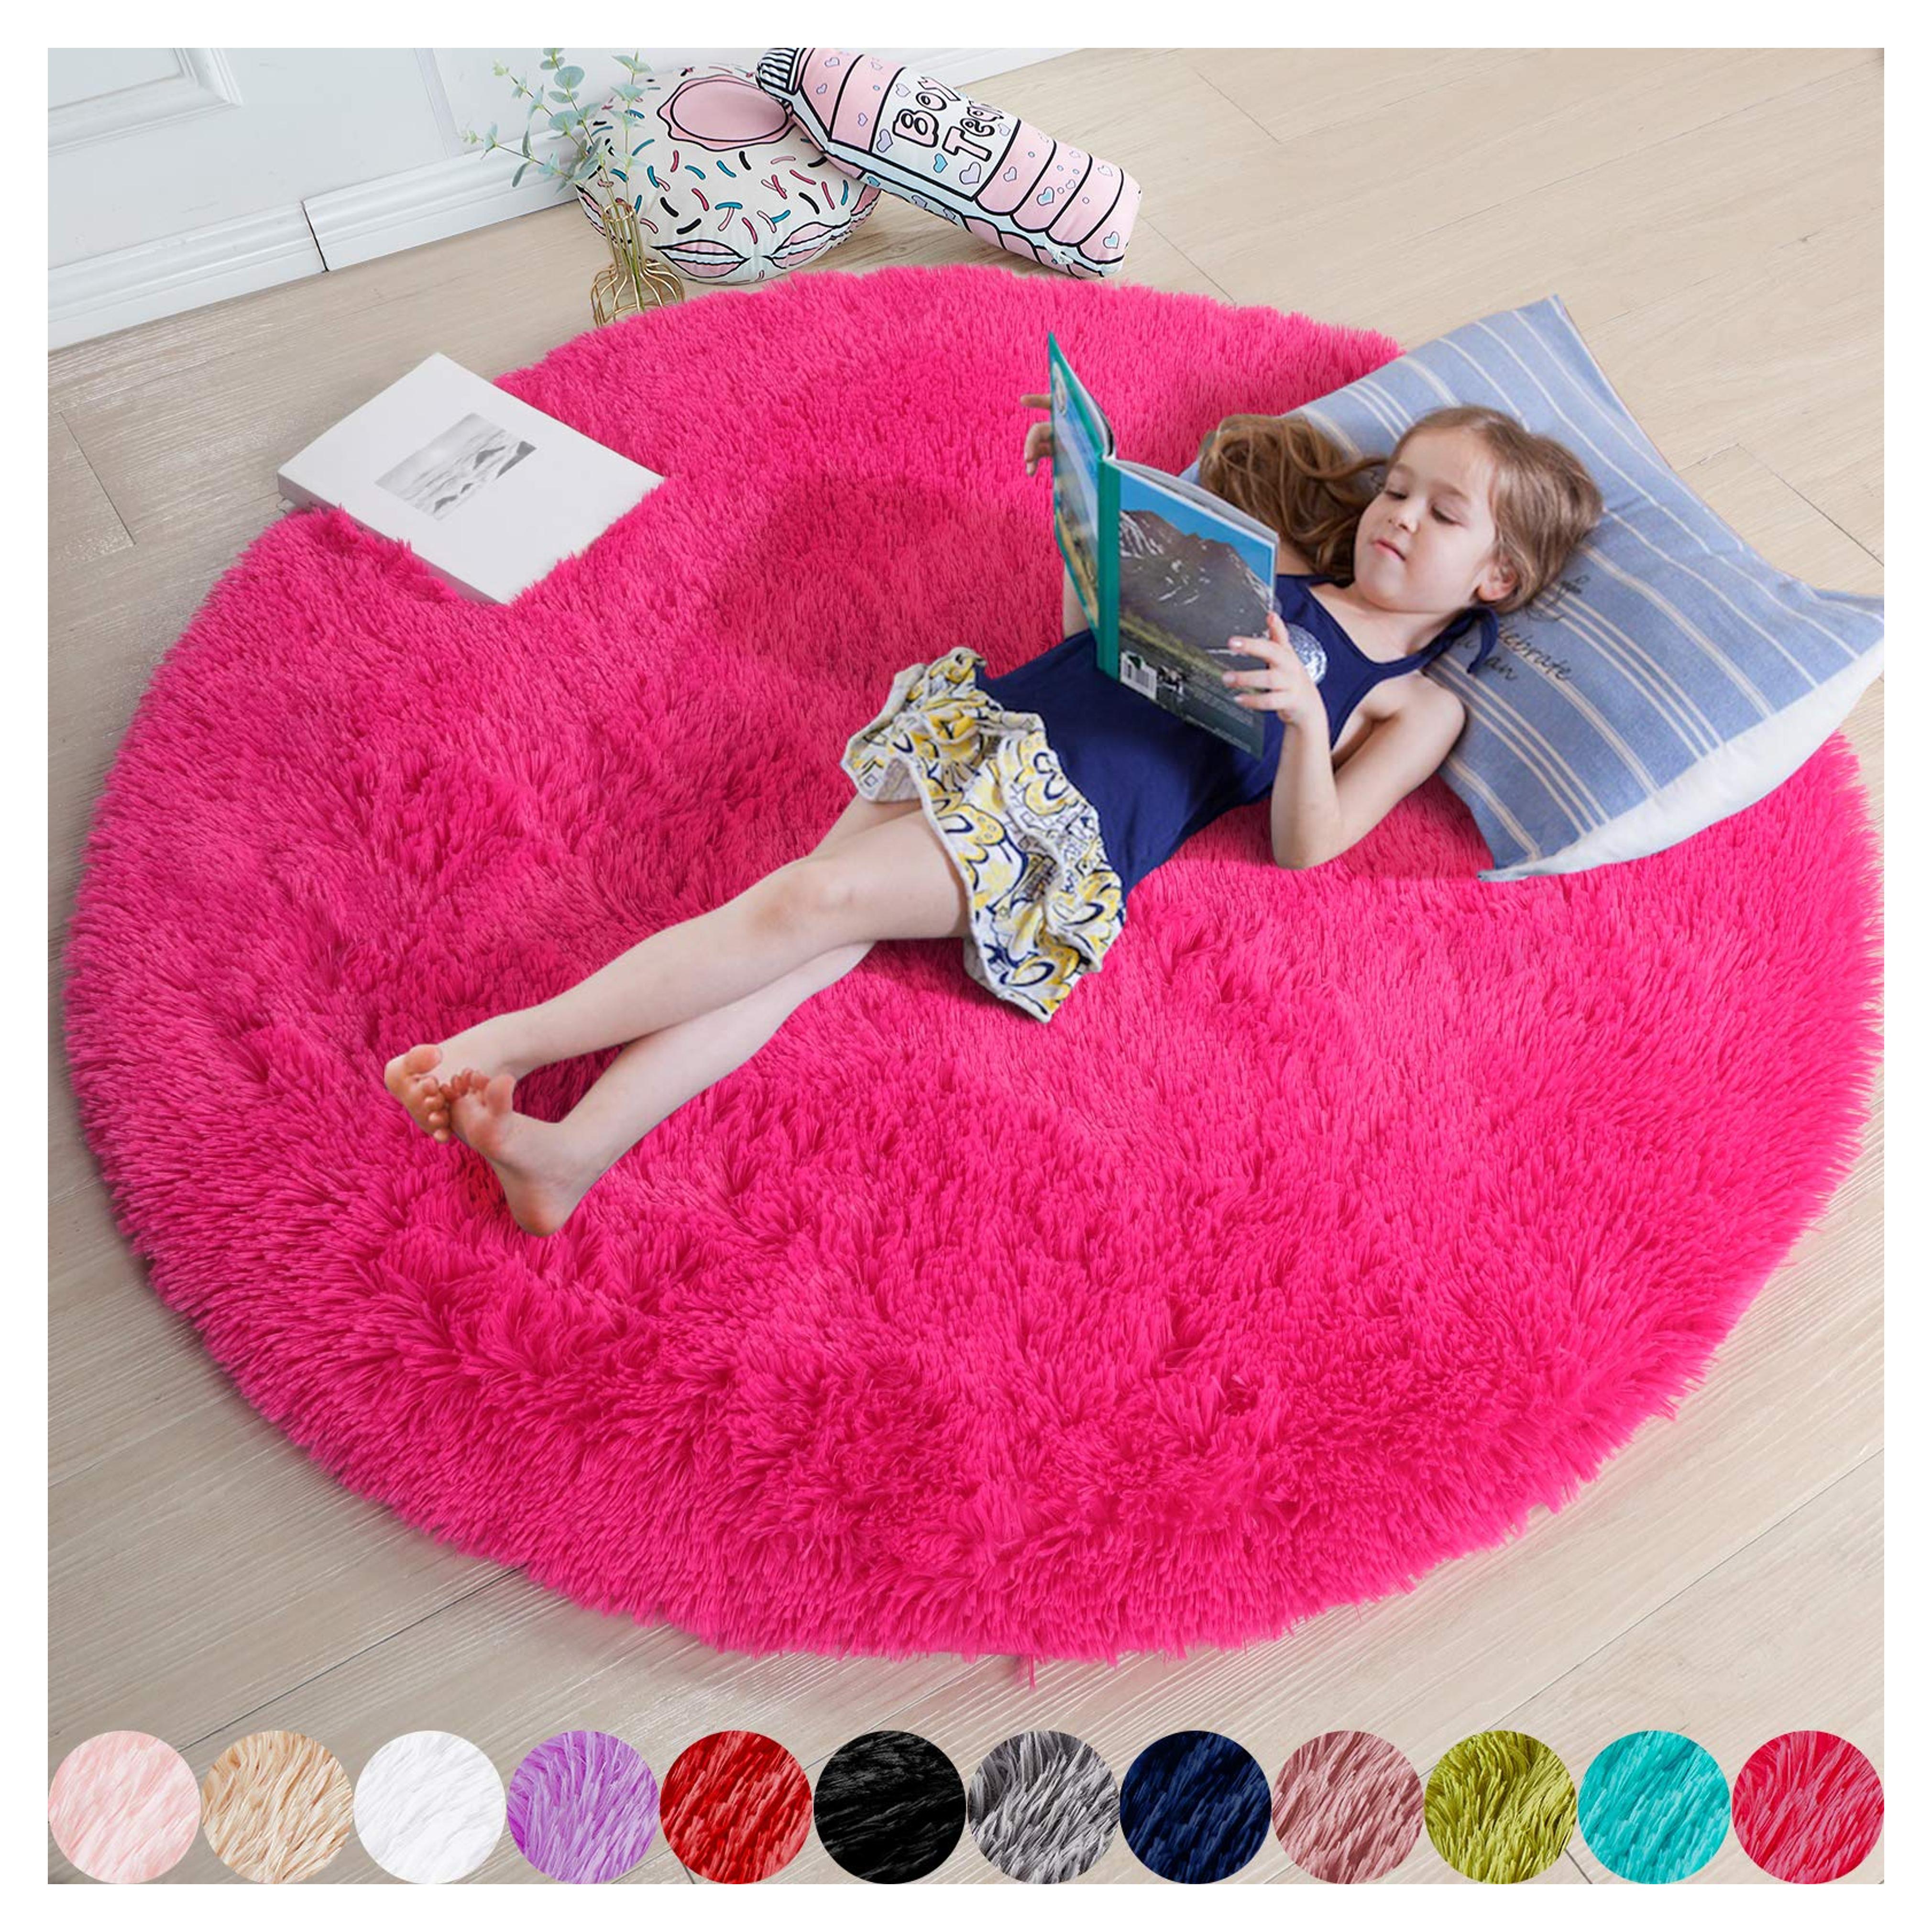 Hot Pink Round Rug for Girls Bedroom,Fluffy Circle Rug 4'X4' for Kids Room,Furry Carpet for Teen Girls Room,Shaggy Circular Rug for Nursery Room,Fuzzy Plush Rug for Dorm,Pink Carpet,Cute Room Decor